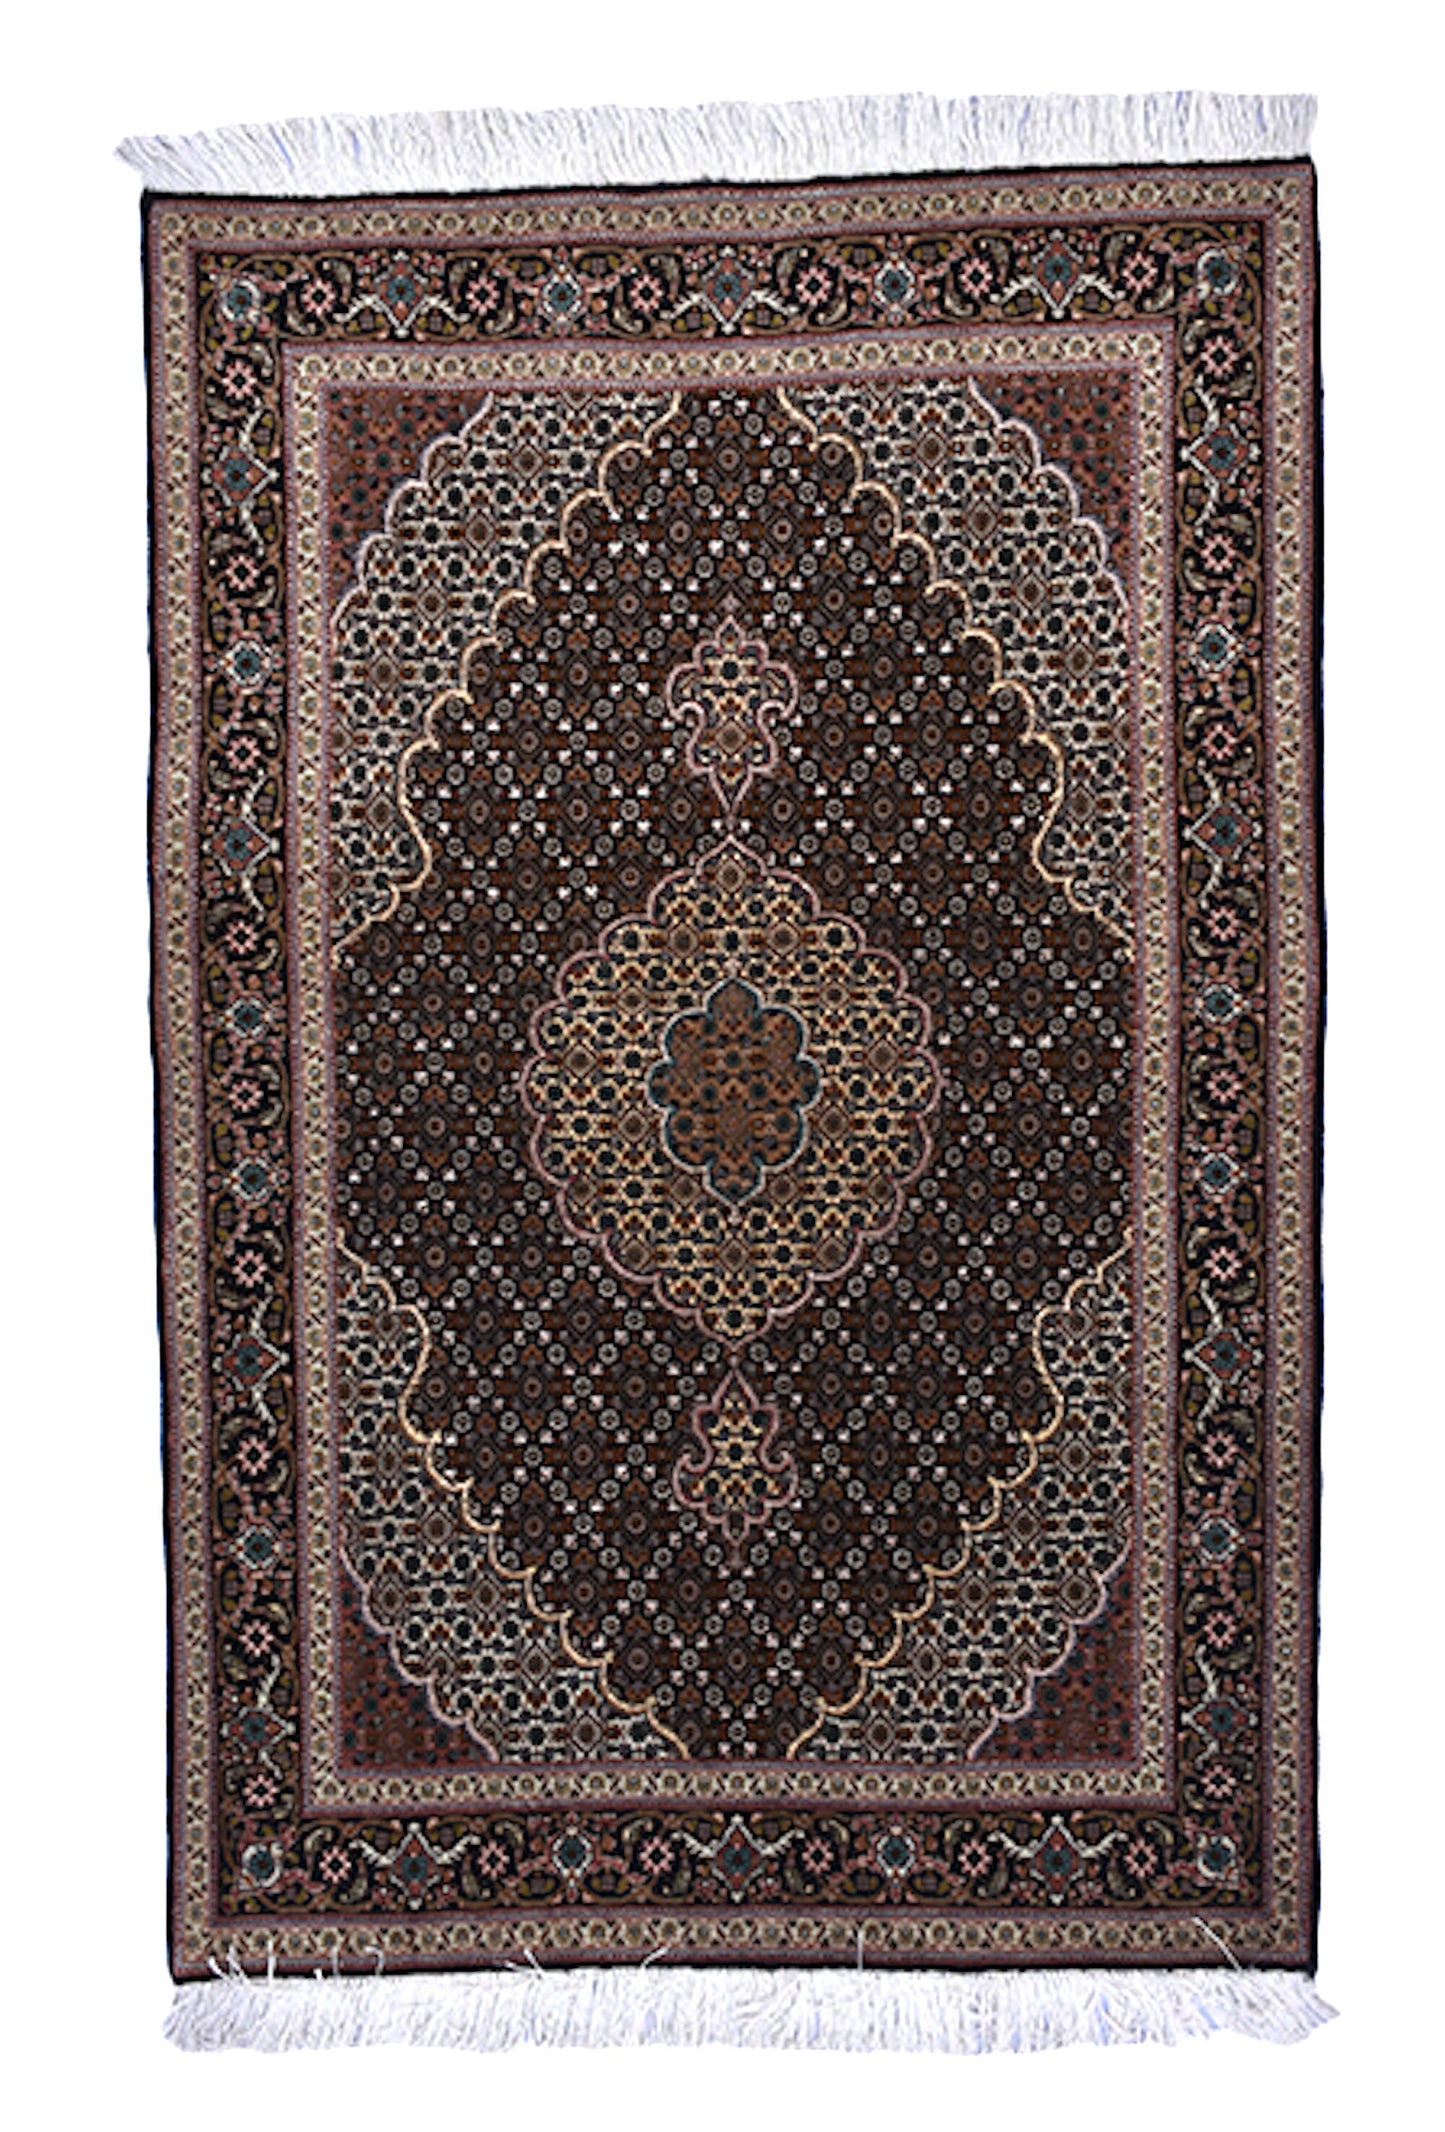 Dark Antique Rug with Large Central Medallion | 3 x 5 Caucasian Wool Rug